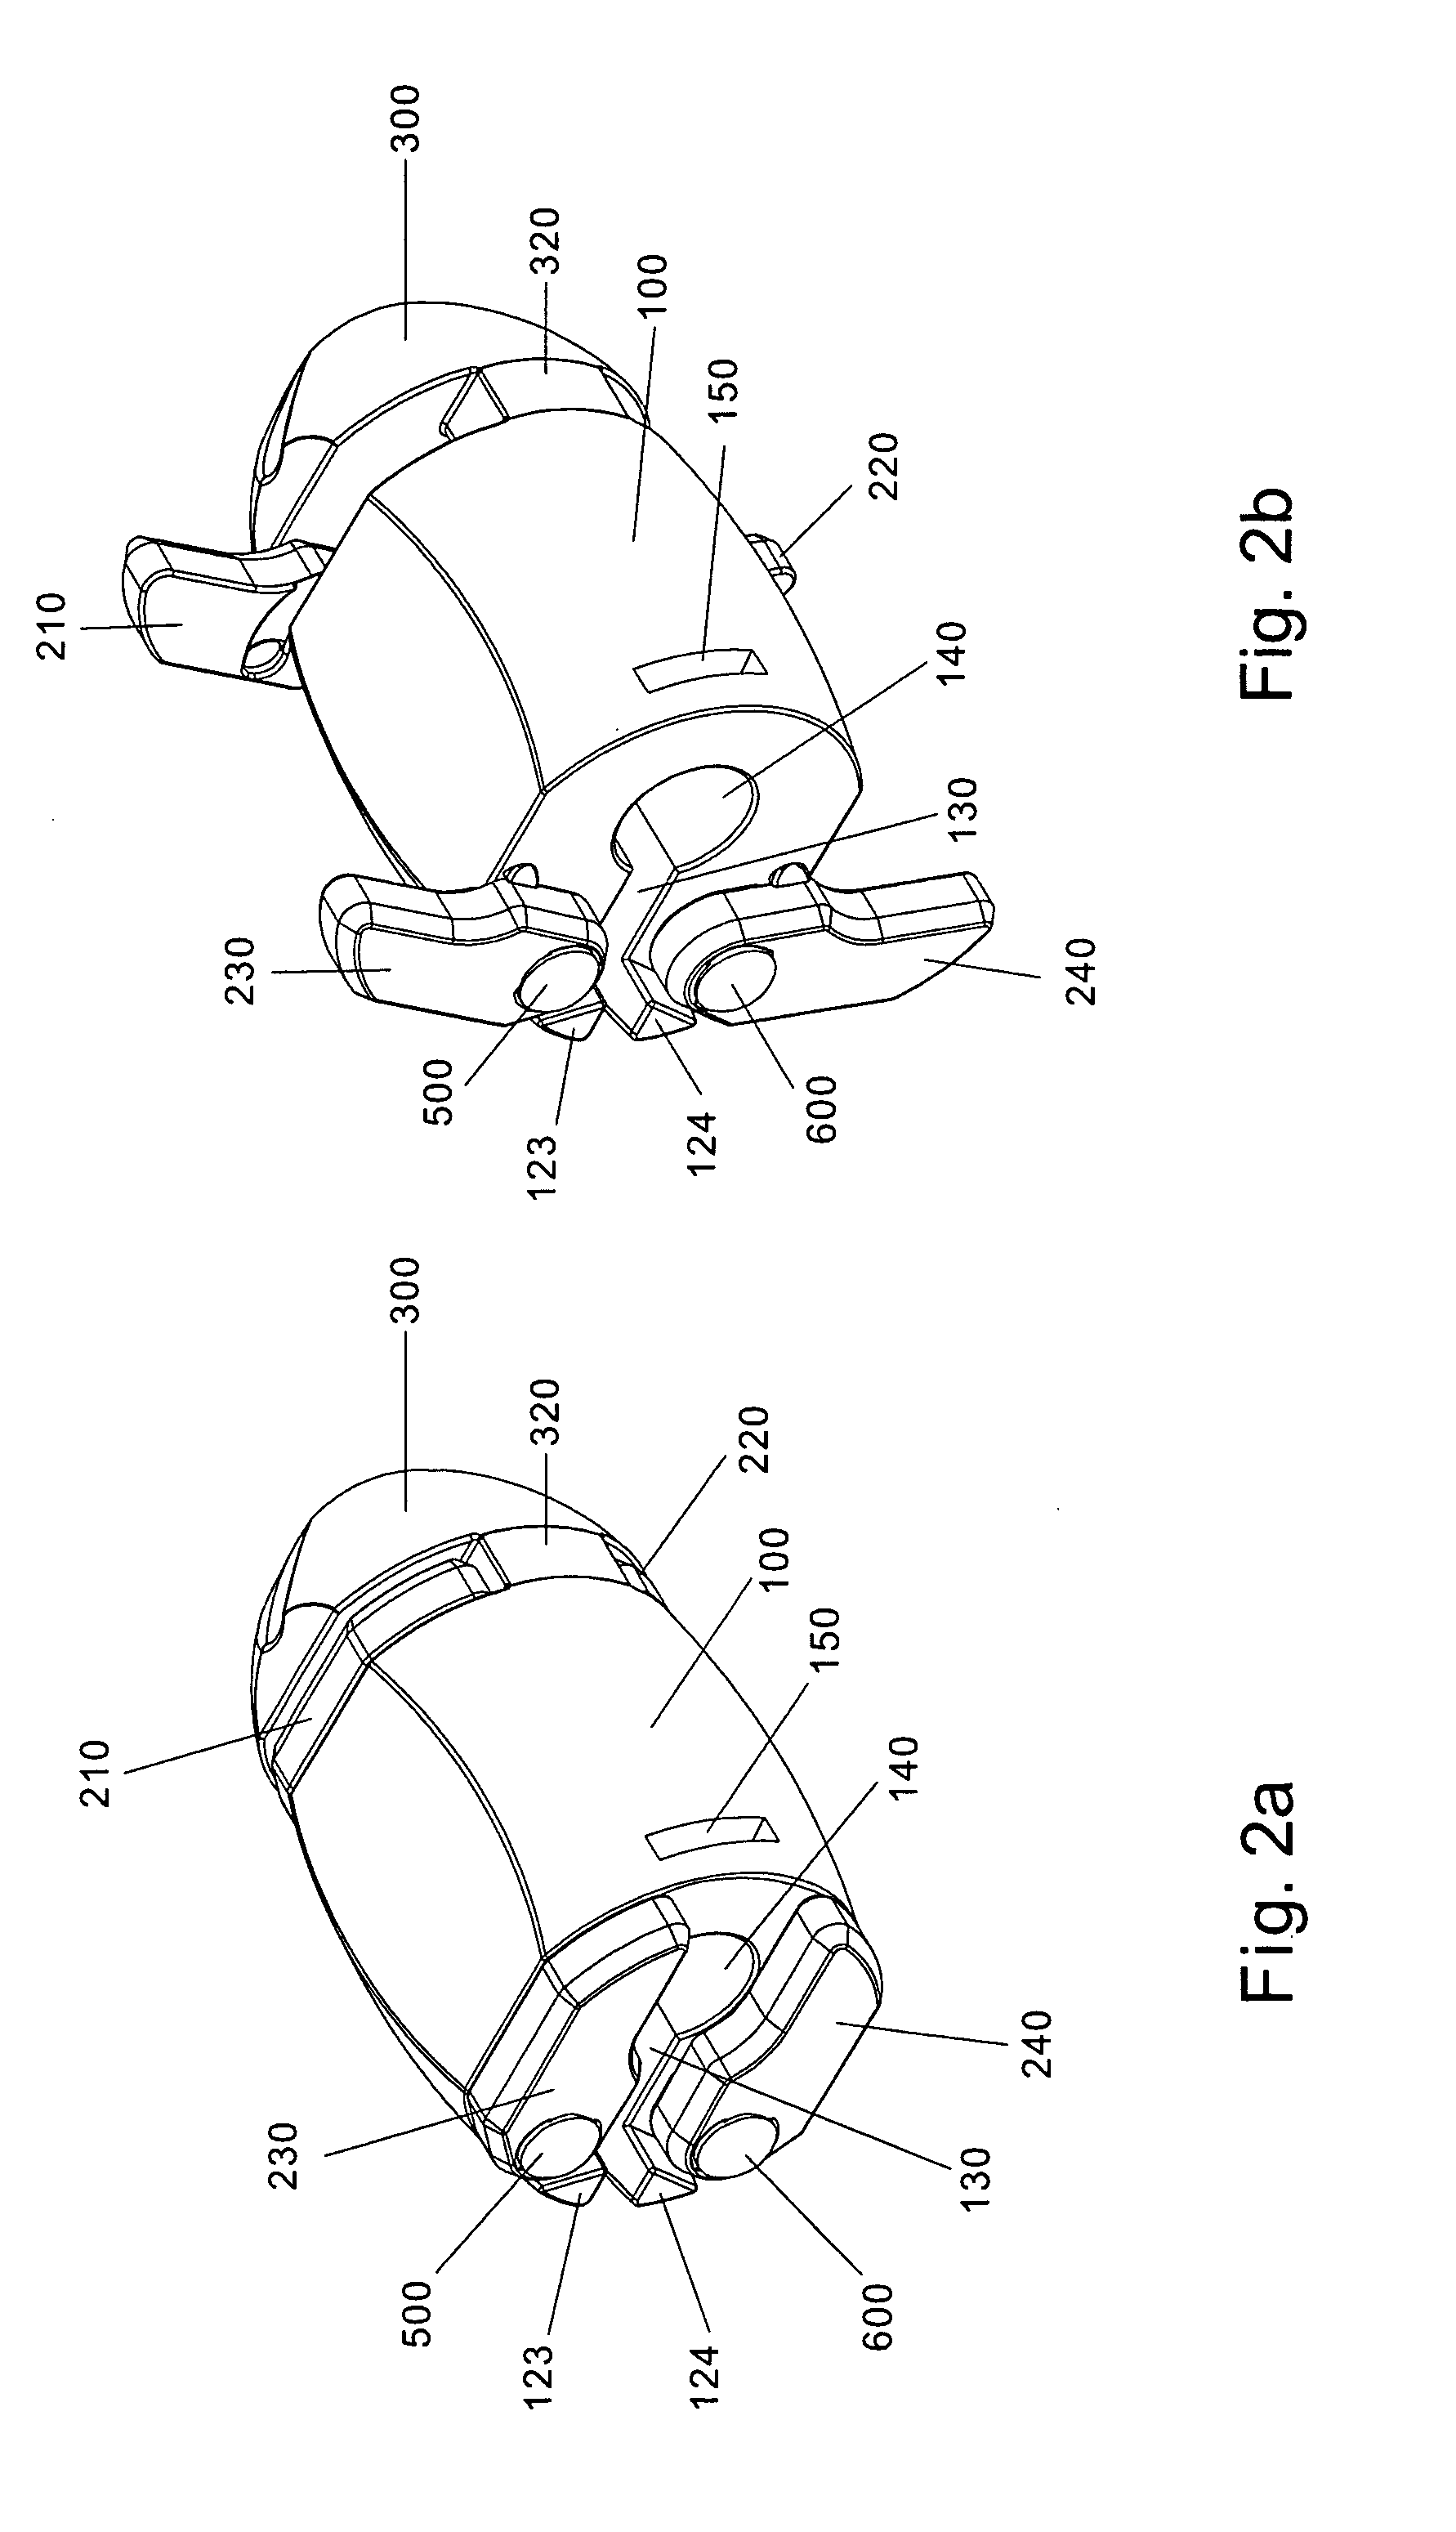 Interspinous spinal fixation apparatus